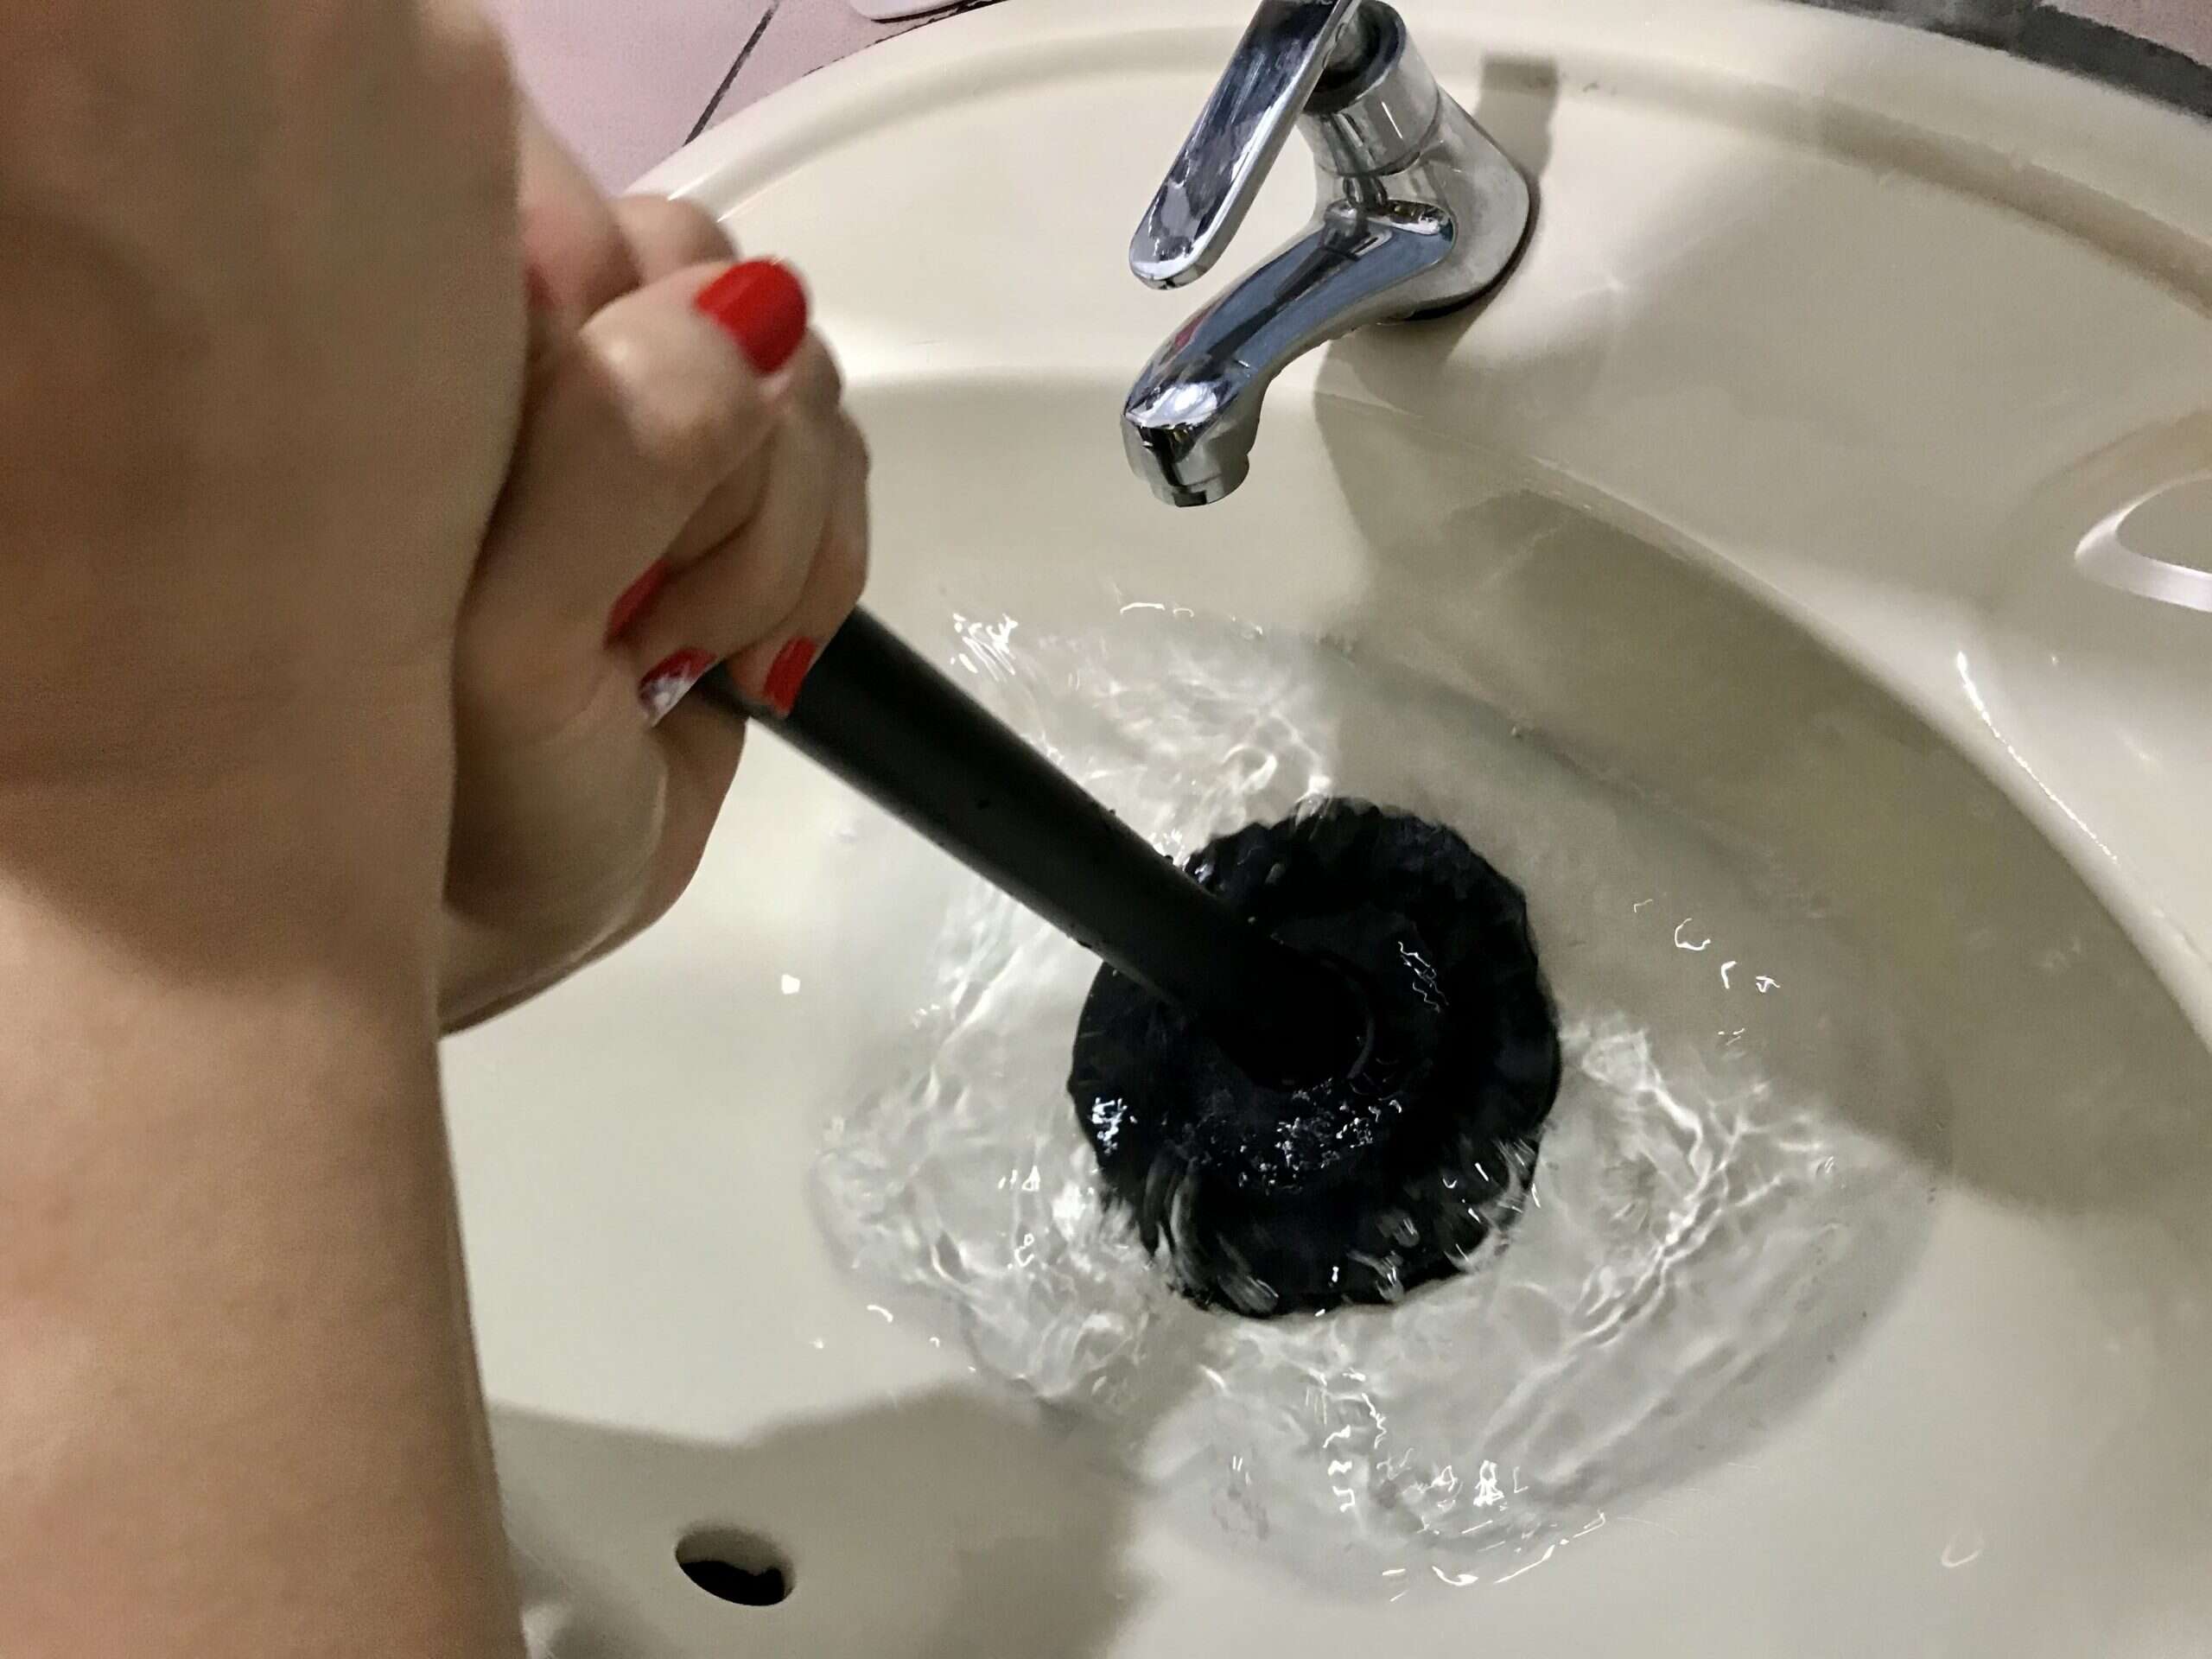 How to Unclog a Bathroom Sink - Easily Fix Common Clogs